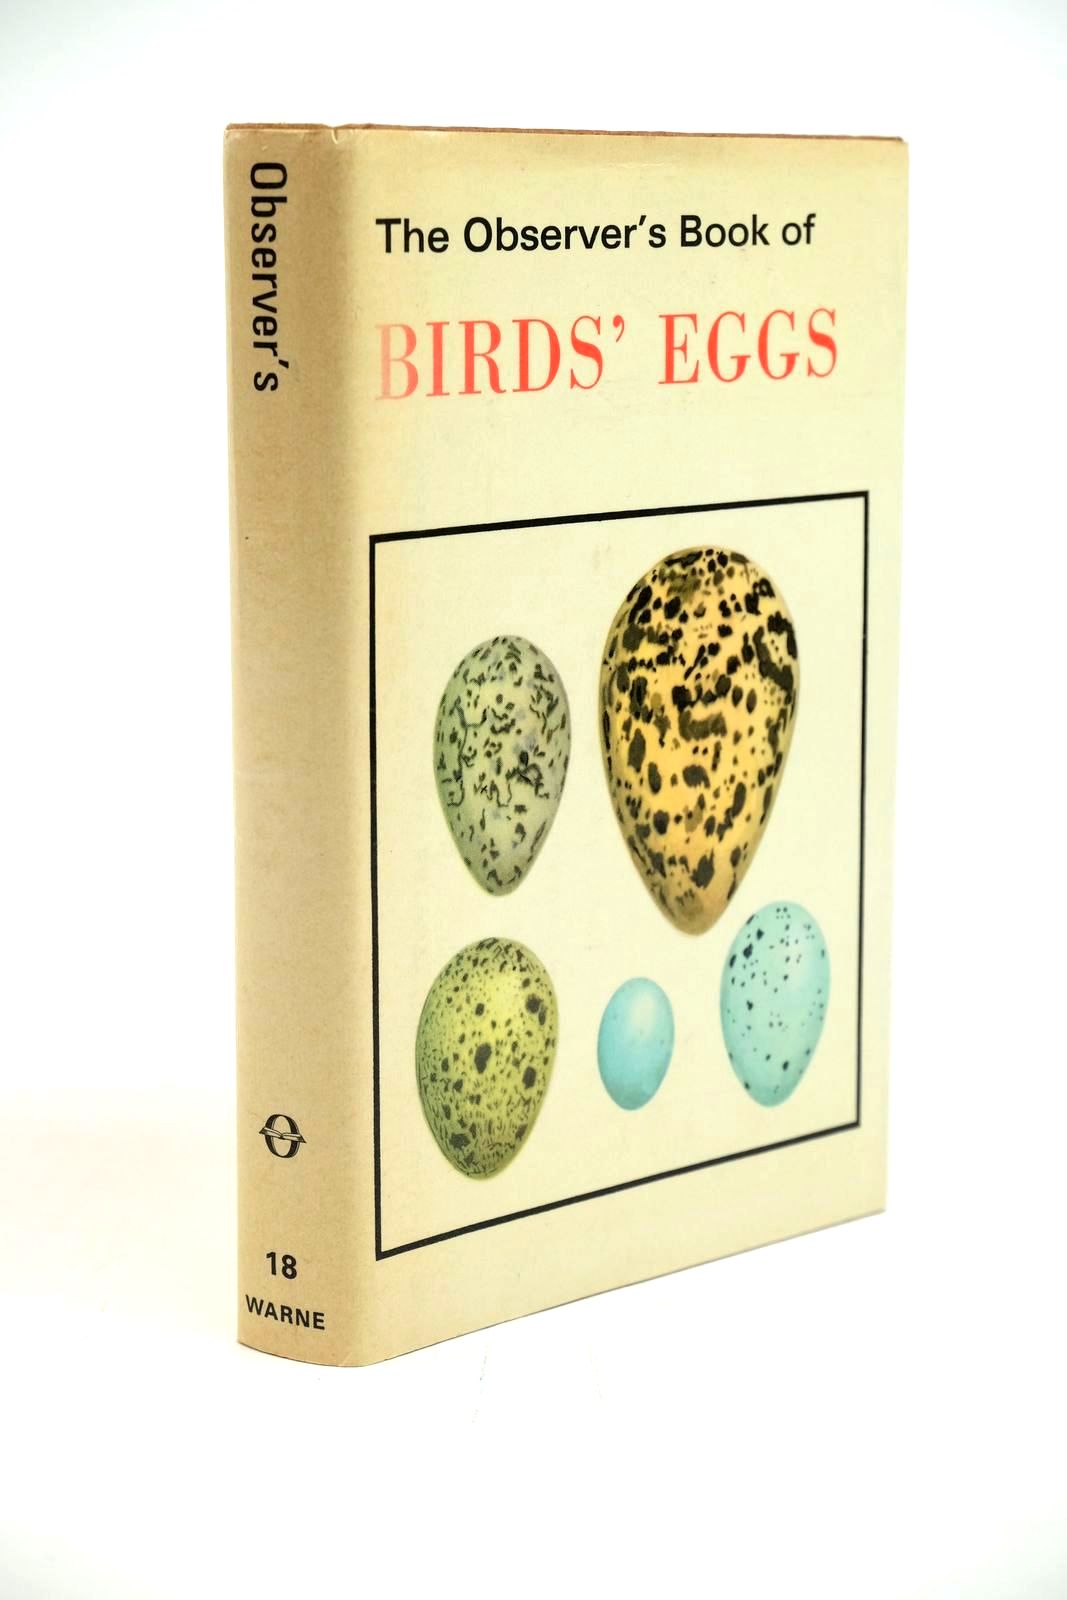 Photo of THE OBSERVER'S BOOK OF BIRDS' EGGS written by Evans, G. illustrated by Swain, H.D. published by Frederick Warne & Co Ltd. (STOCK CODE: 1321422)  for sale by Stella & Rose's Books